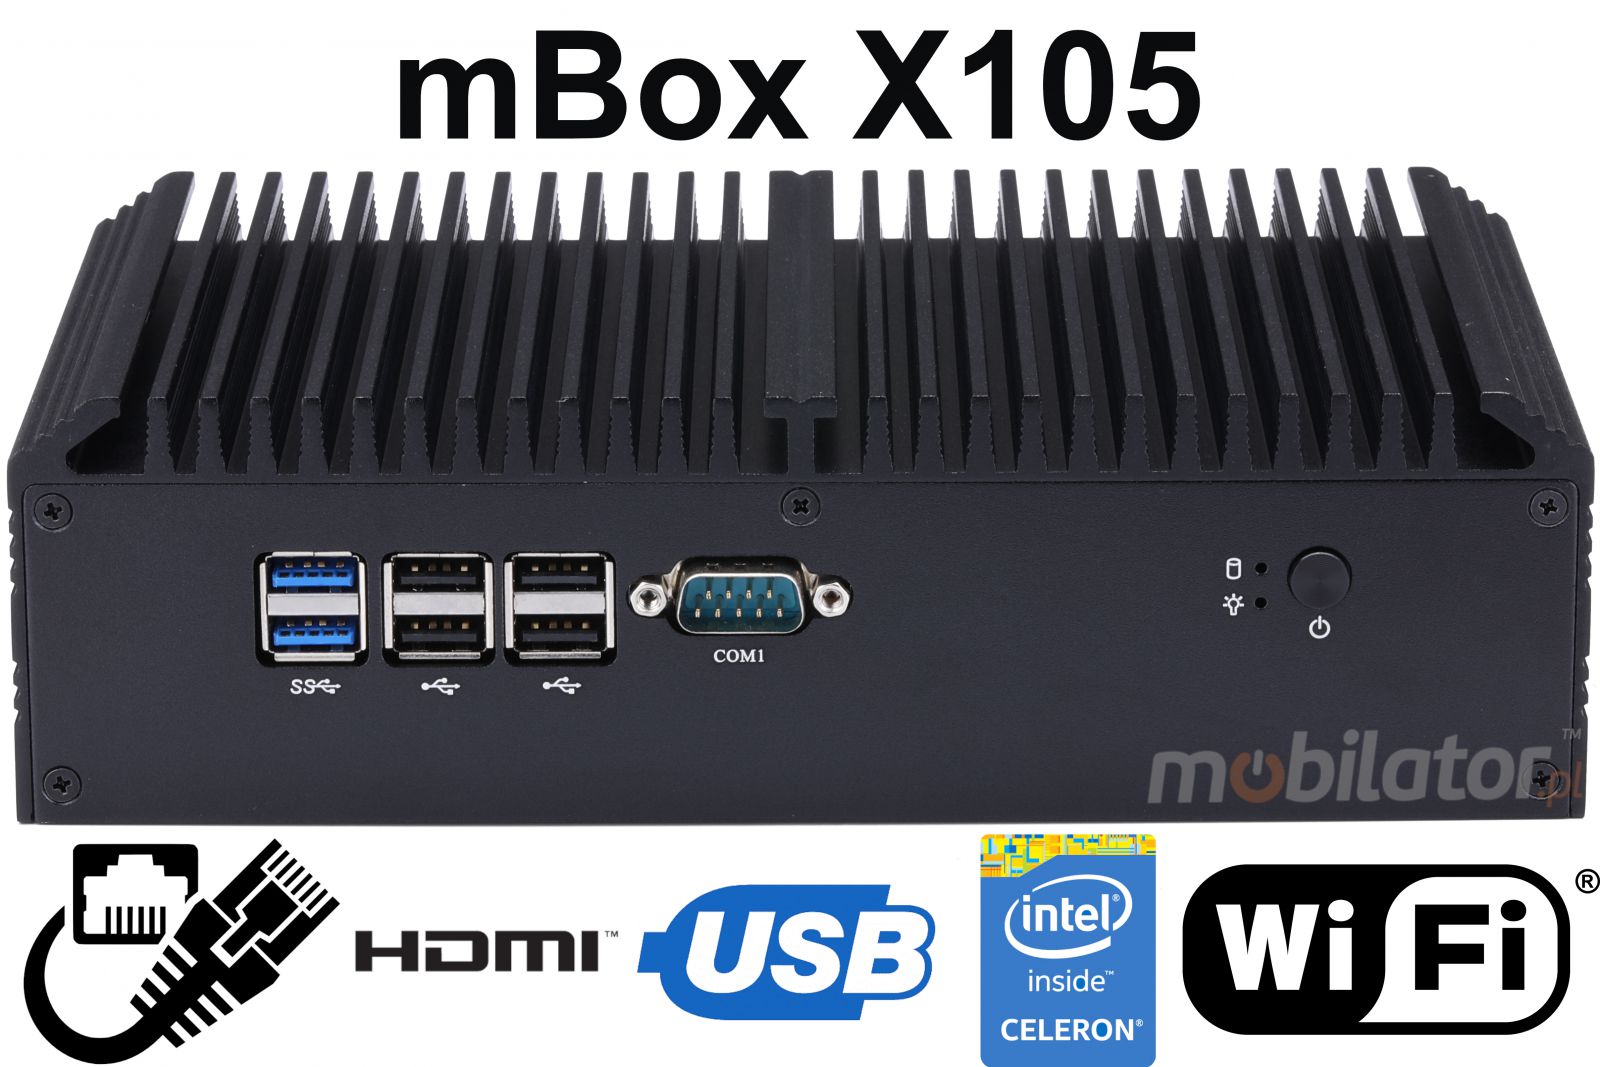 mBox X105 v.3 - Industrial Mini Computer with Intel Celeron 3855U Processor - M.2 disk (with second disk option) - USB 3.0, 2x HDMI and WiFi - Title image